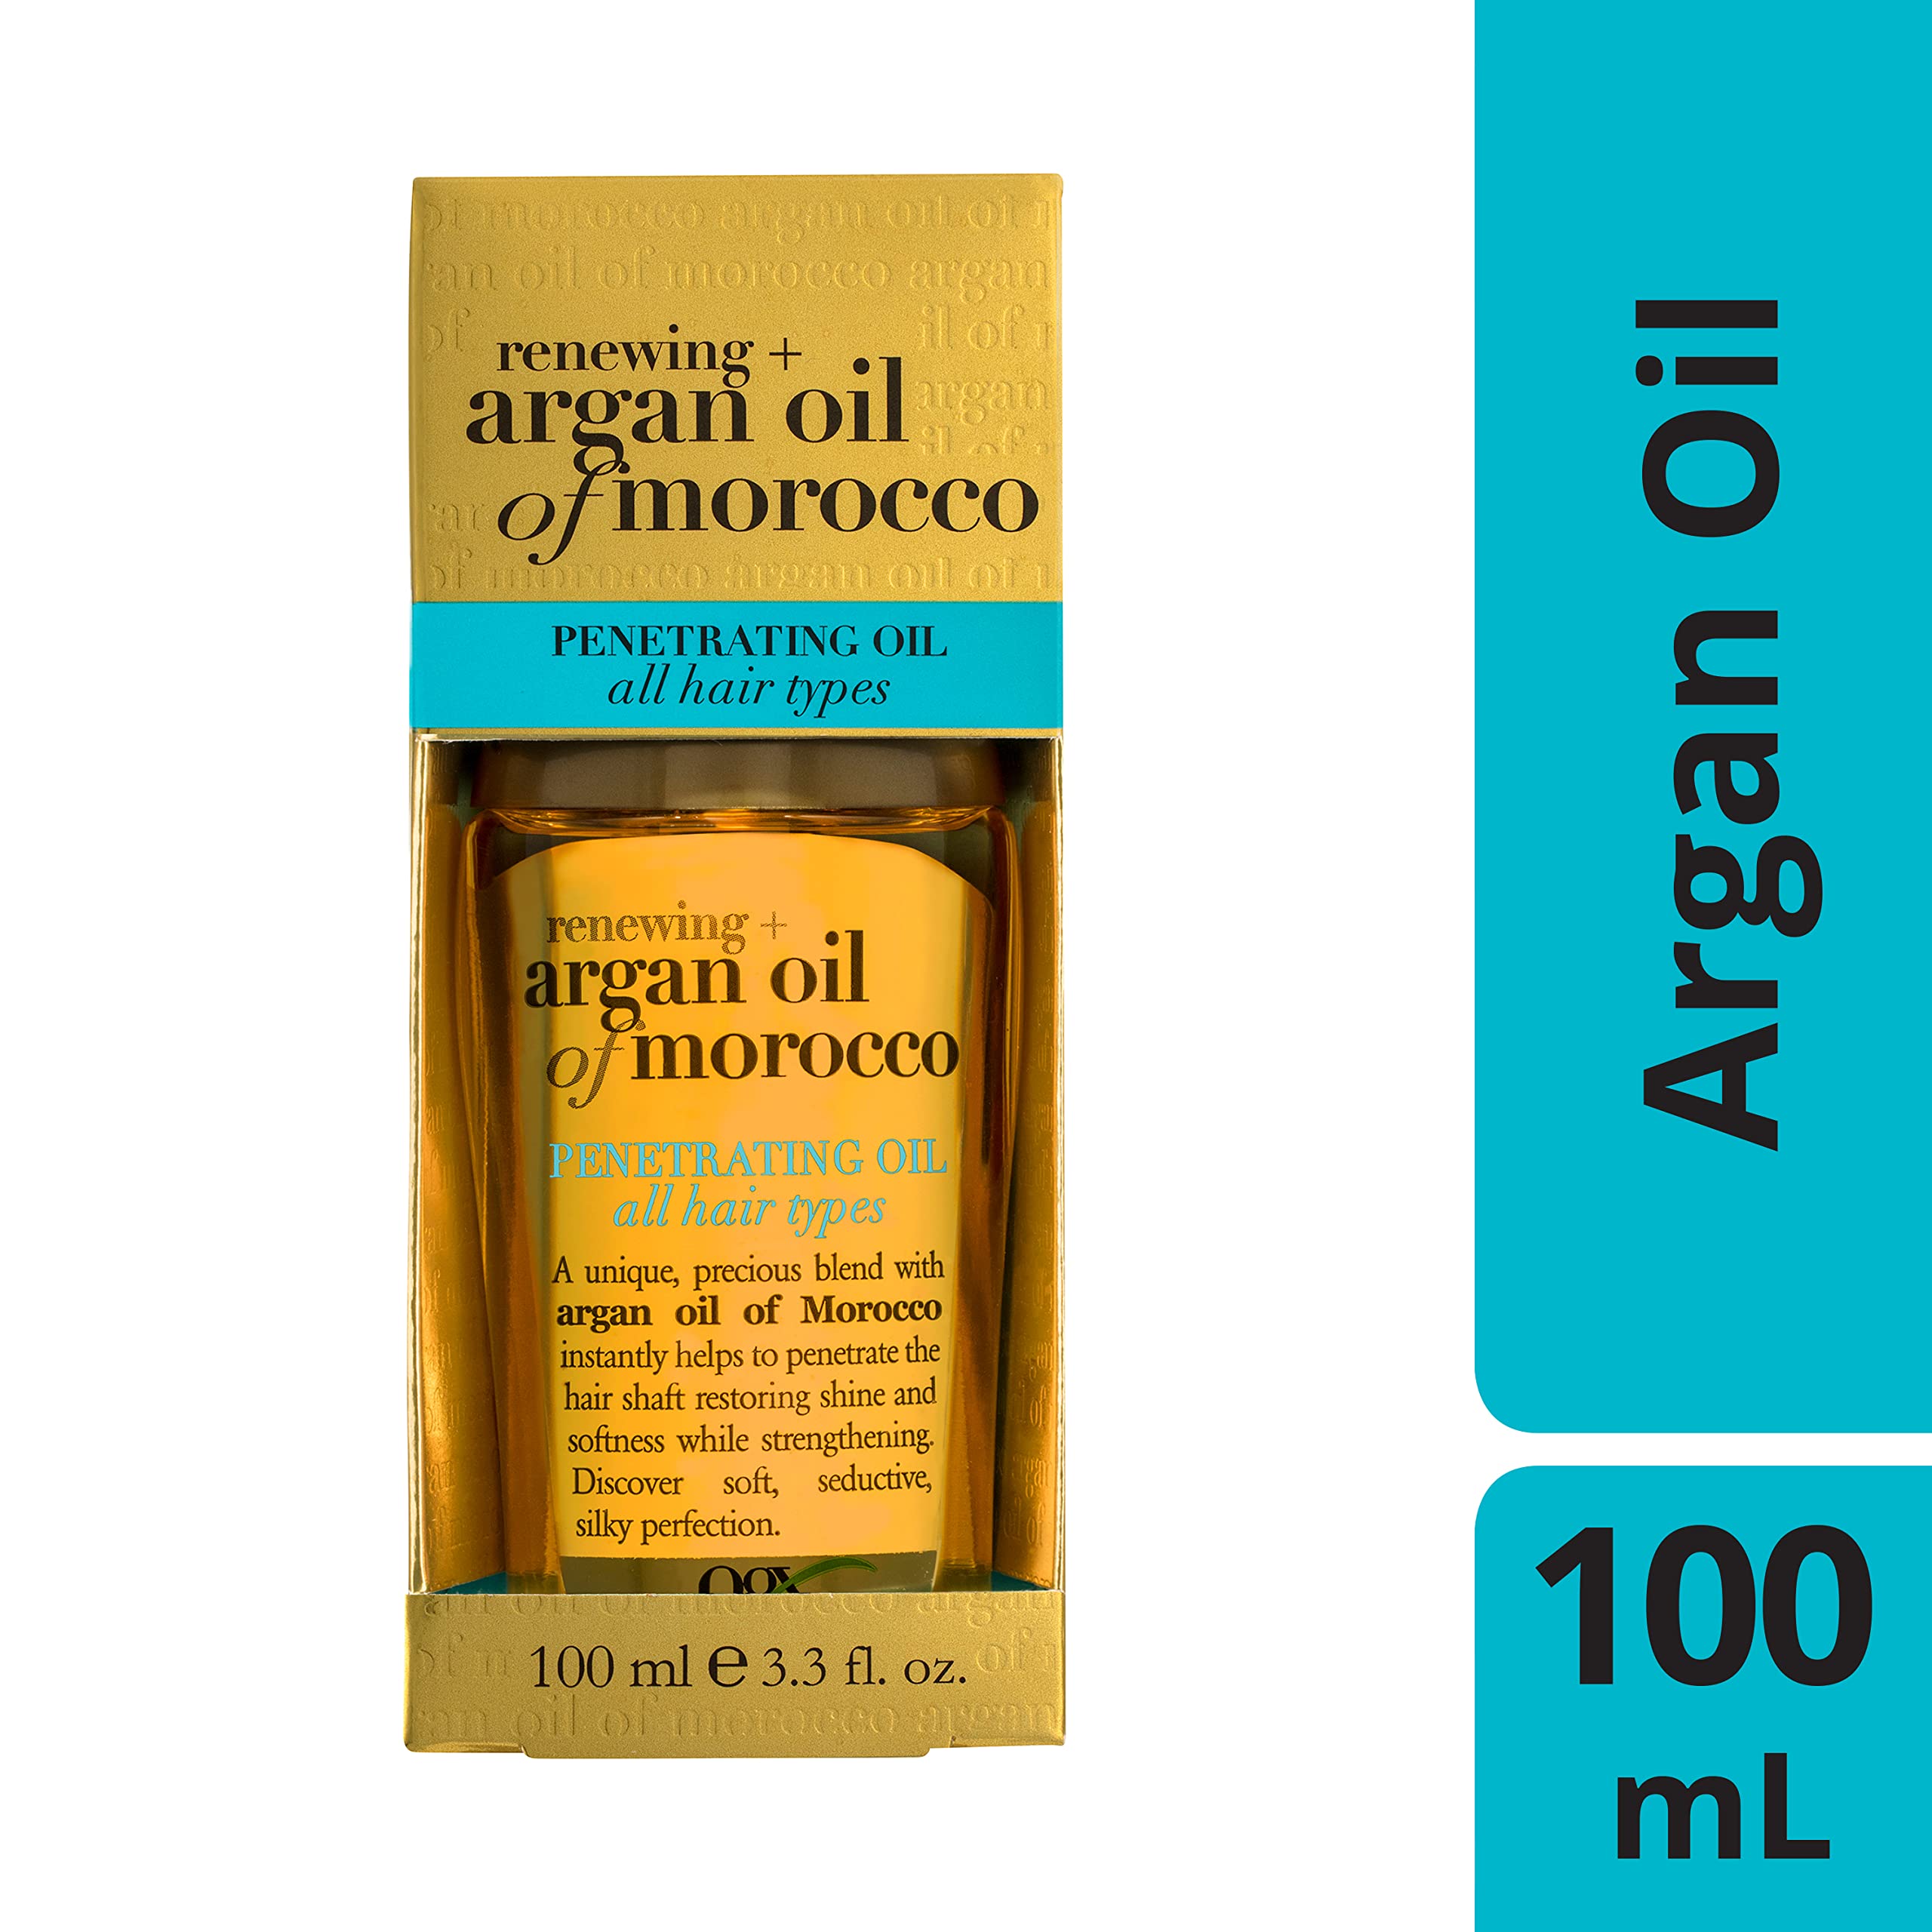 OGX Renewing + Argan Oil of Morocco Penetrating Hair Oil Treatment, Moisturizing & Strengthening Silky Hair Oil for All Hair Types, Paraben-Free, Sulfated-Surfactants Free, 3.3 fl oz